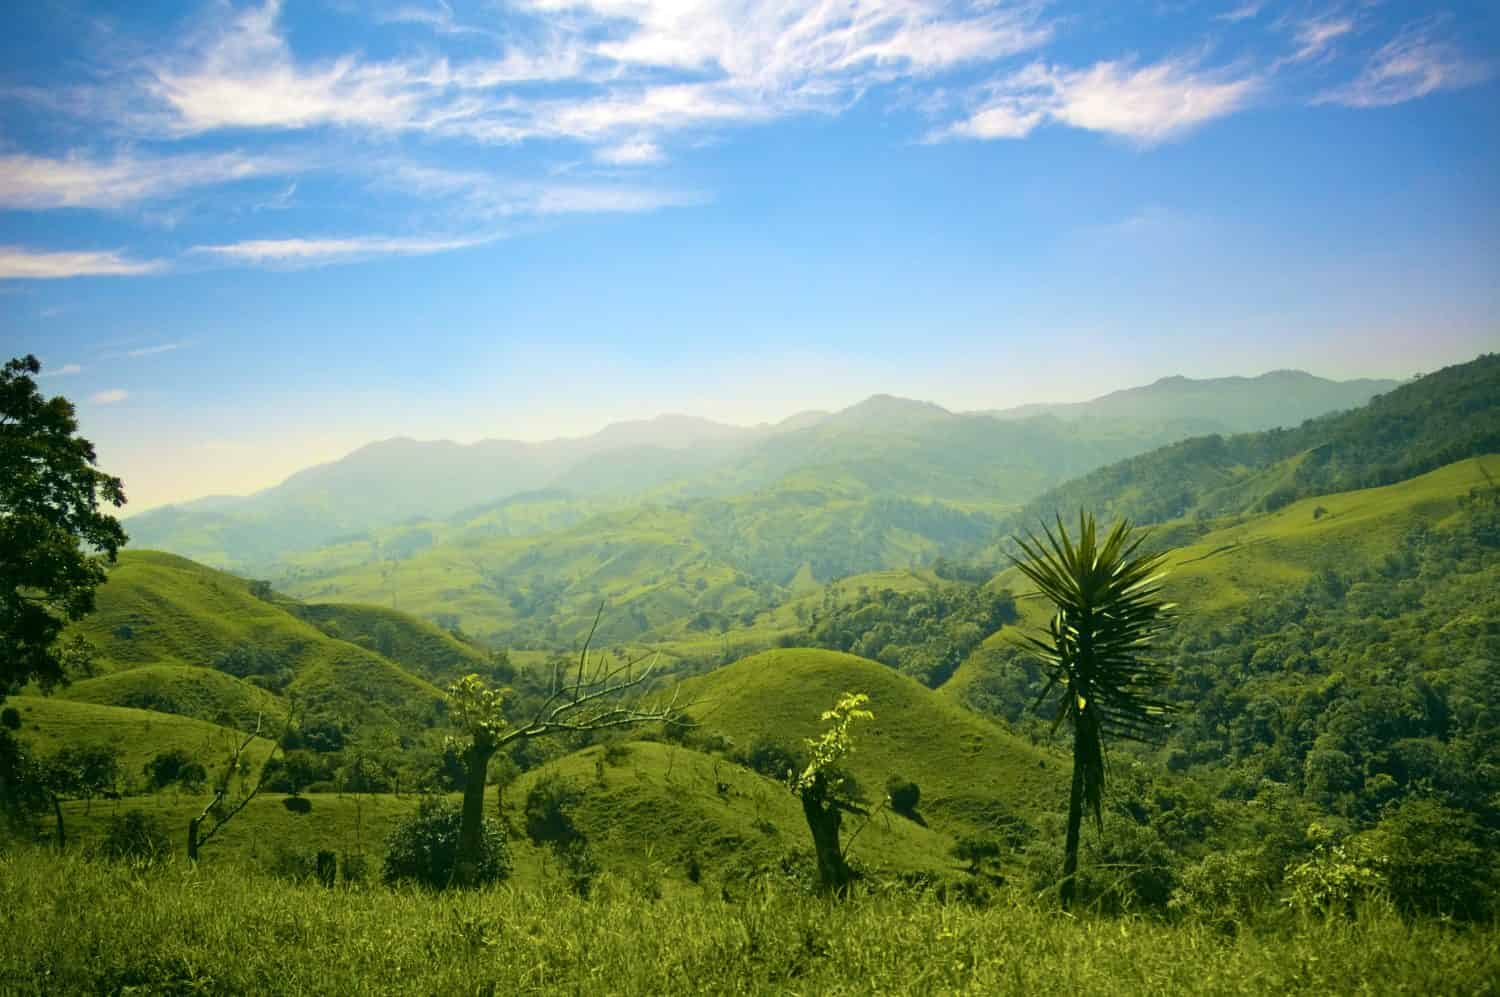 Hills and mountains in Costa Rica